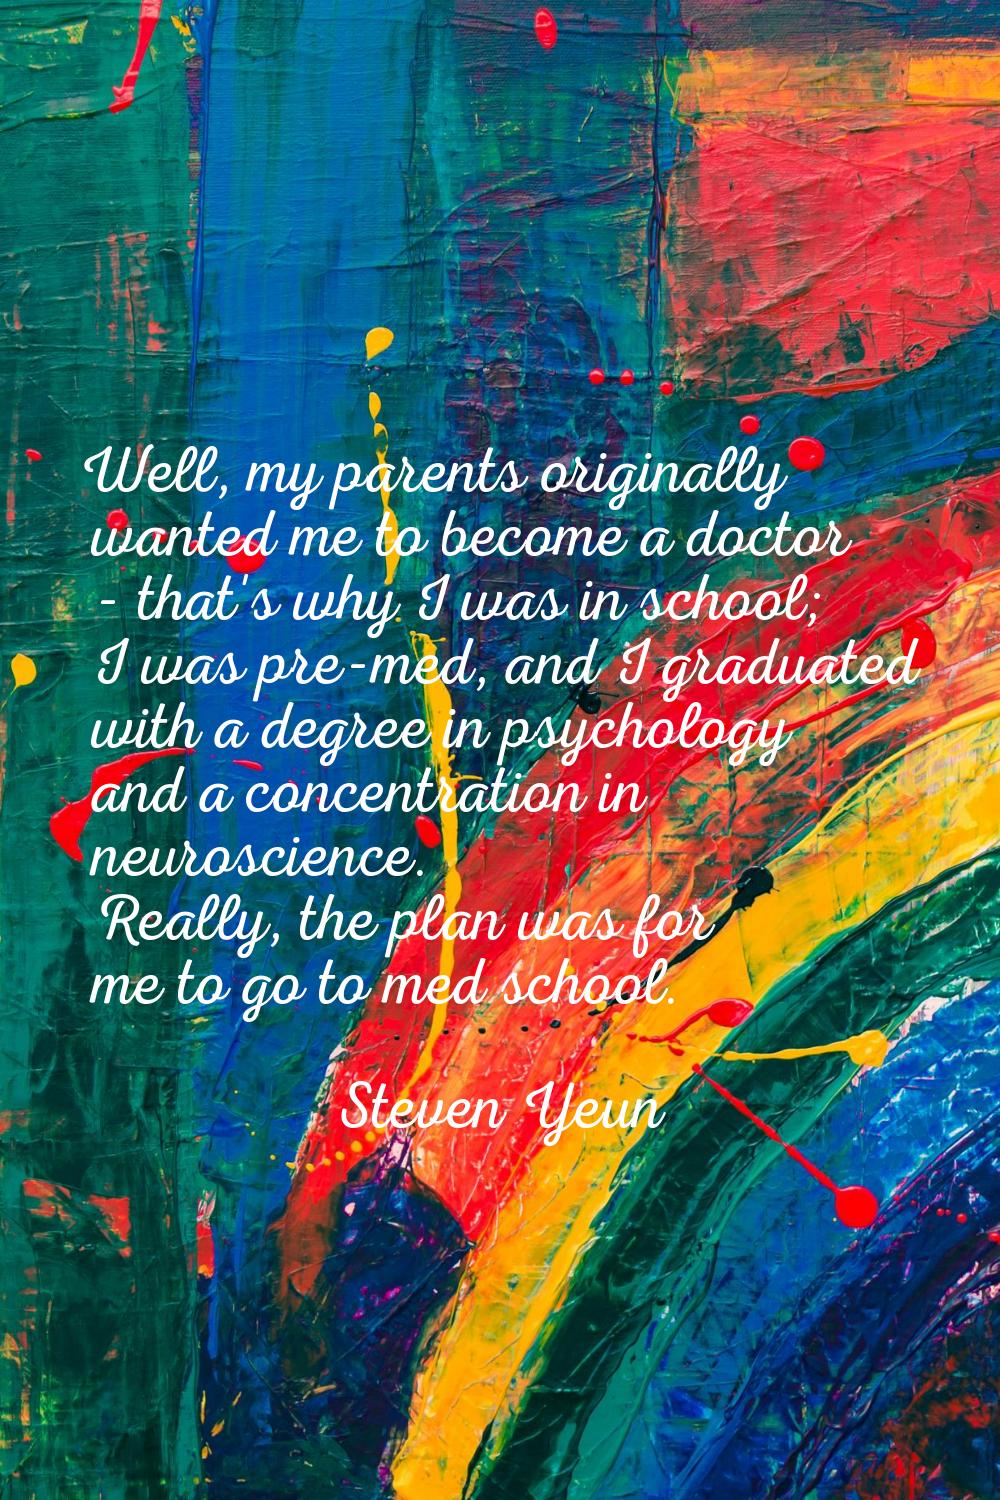 Well, my parents originally wanted me to become a doctor - that's why I was in school; I was pre-me